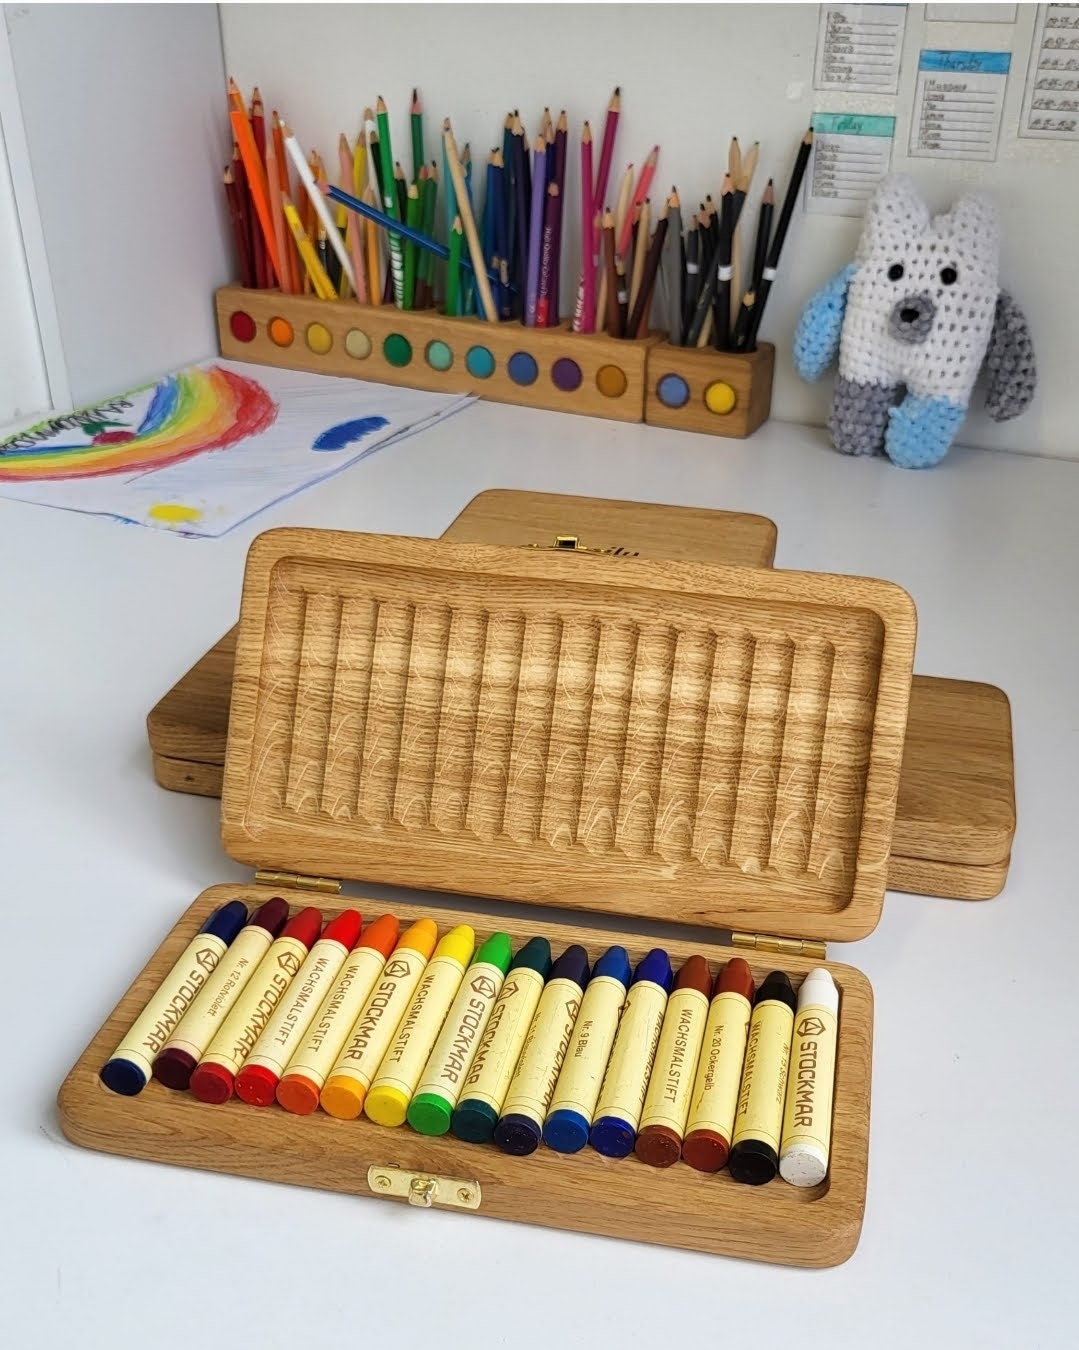 Waldorf crayon holder for Stockmar 16 blocks and 16 sticks rectangular,  gift for kids, desk organization, crayons are not included